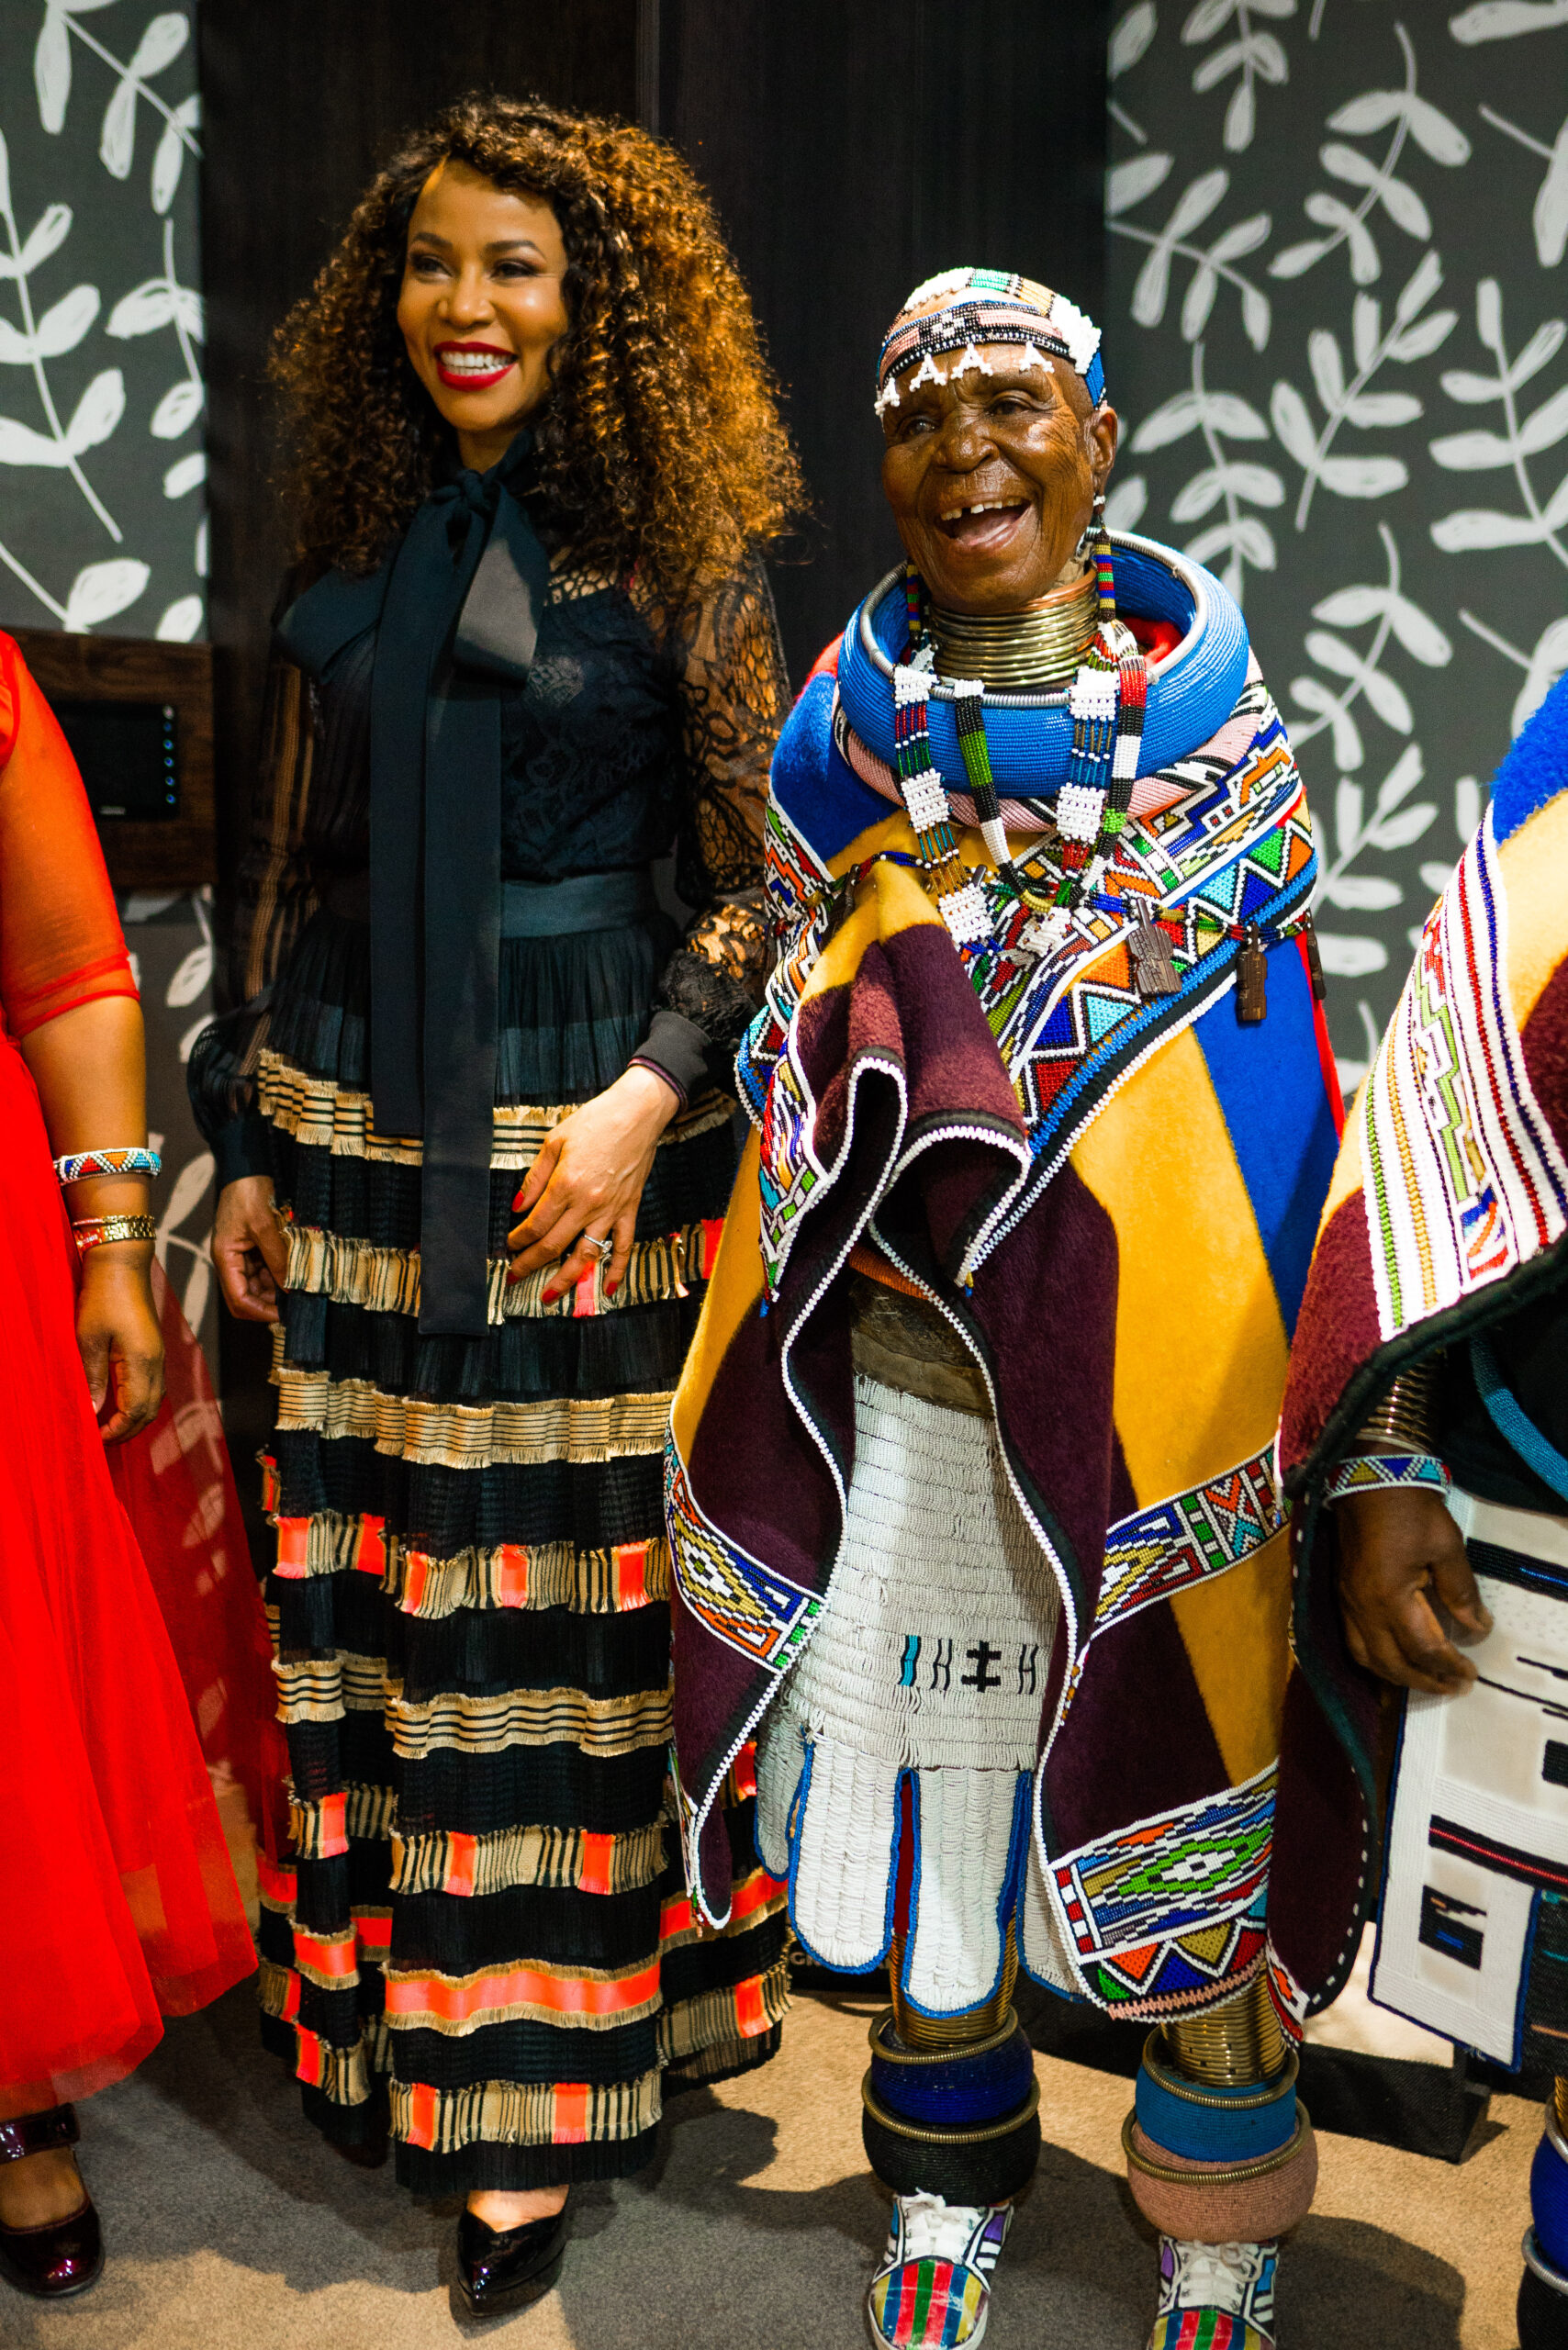 AFI and Esther Mahlangu collaborate to launch a Limited-Range of Culturally Inspired T-Shirts